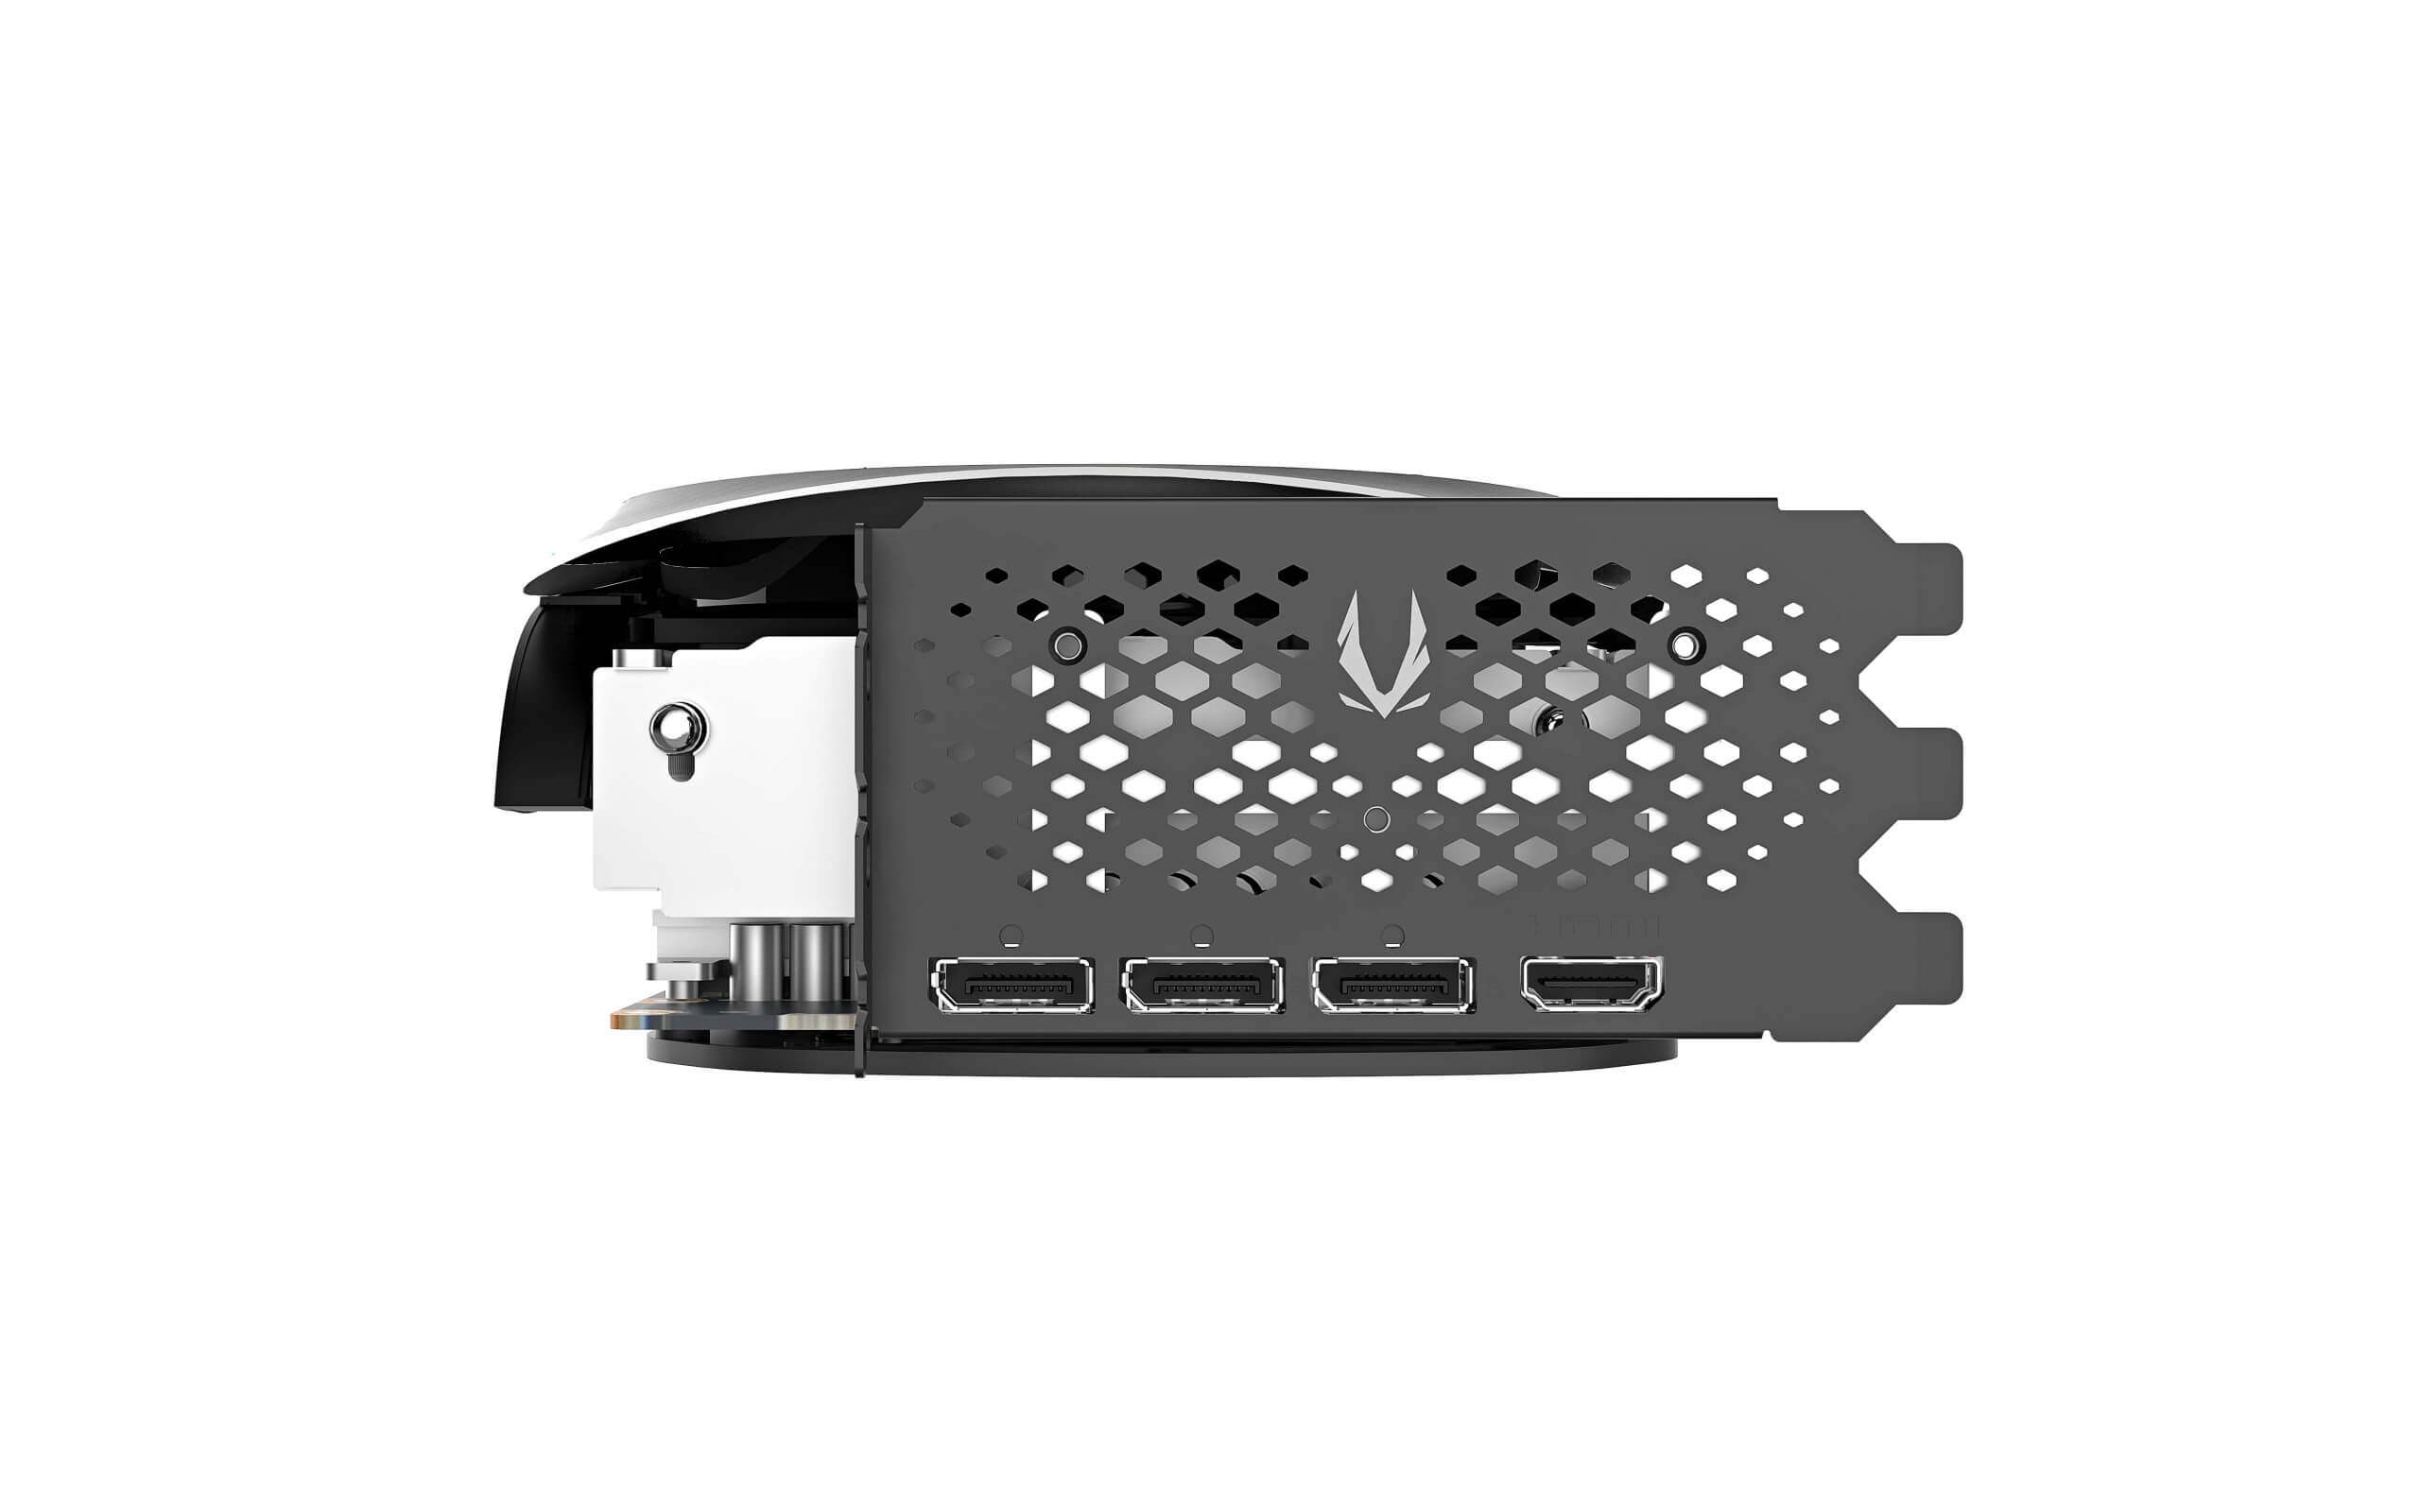 Image of the zotac graphics card showing the connectors and the port connectors